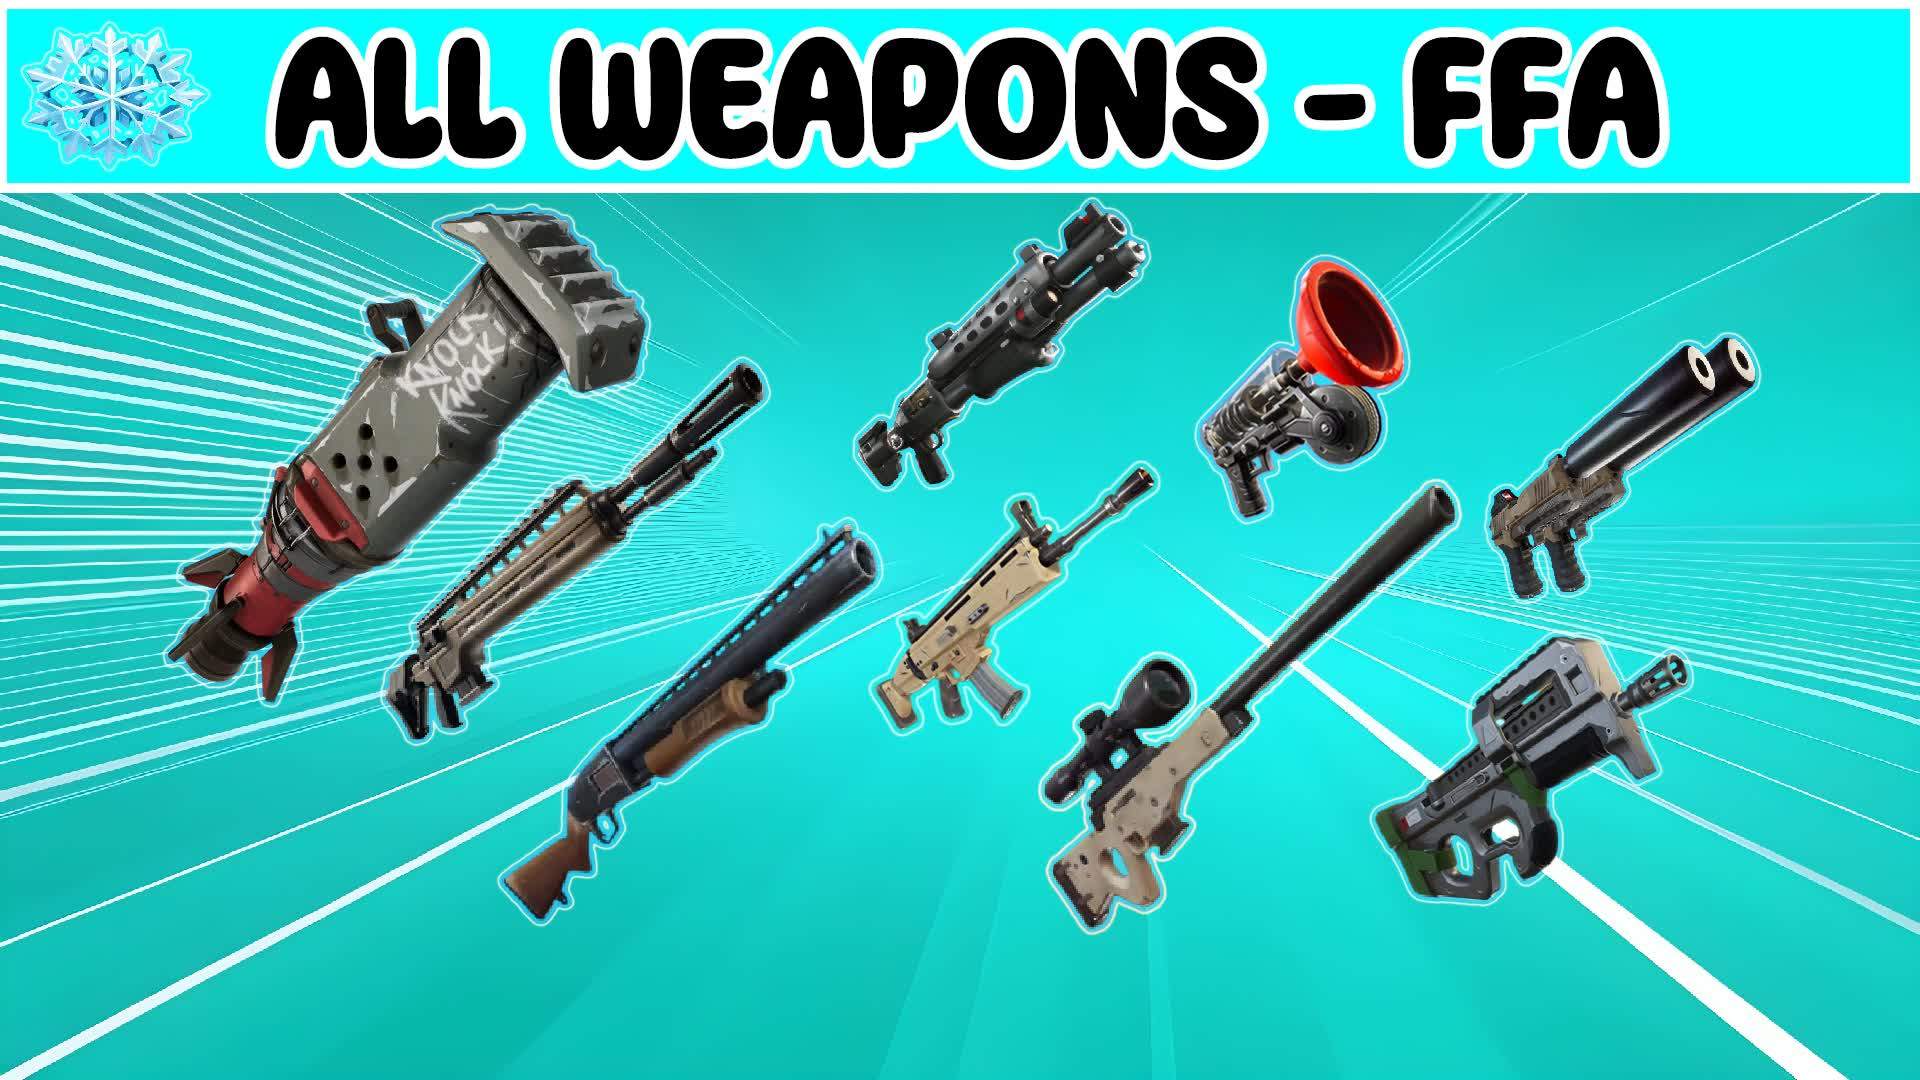 ❄️ALL WEAPONS - FFA